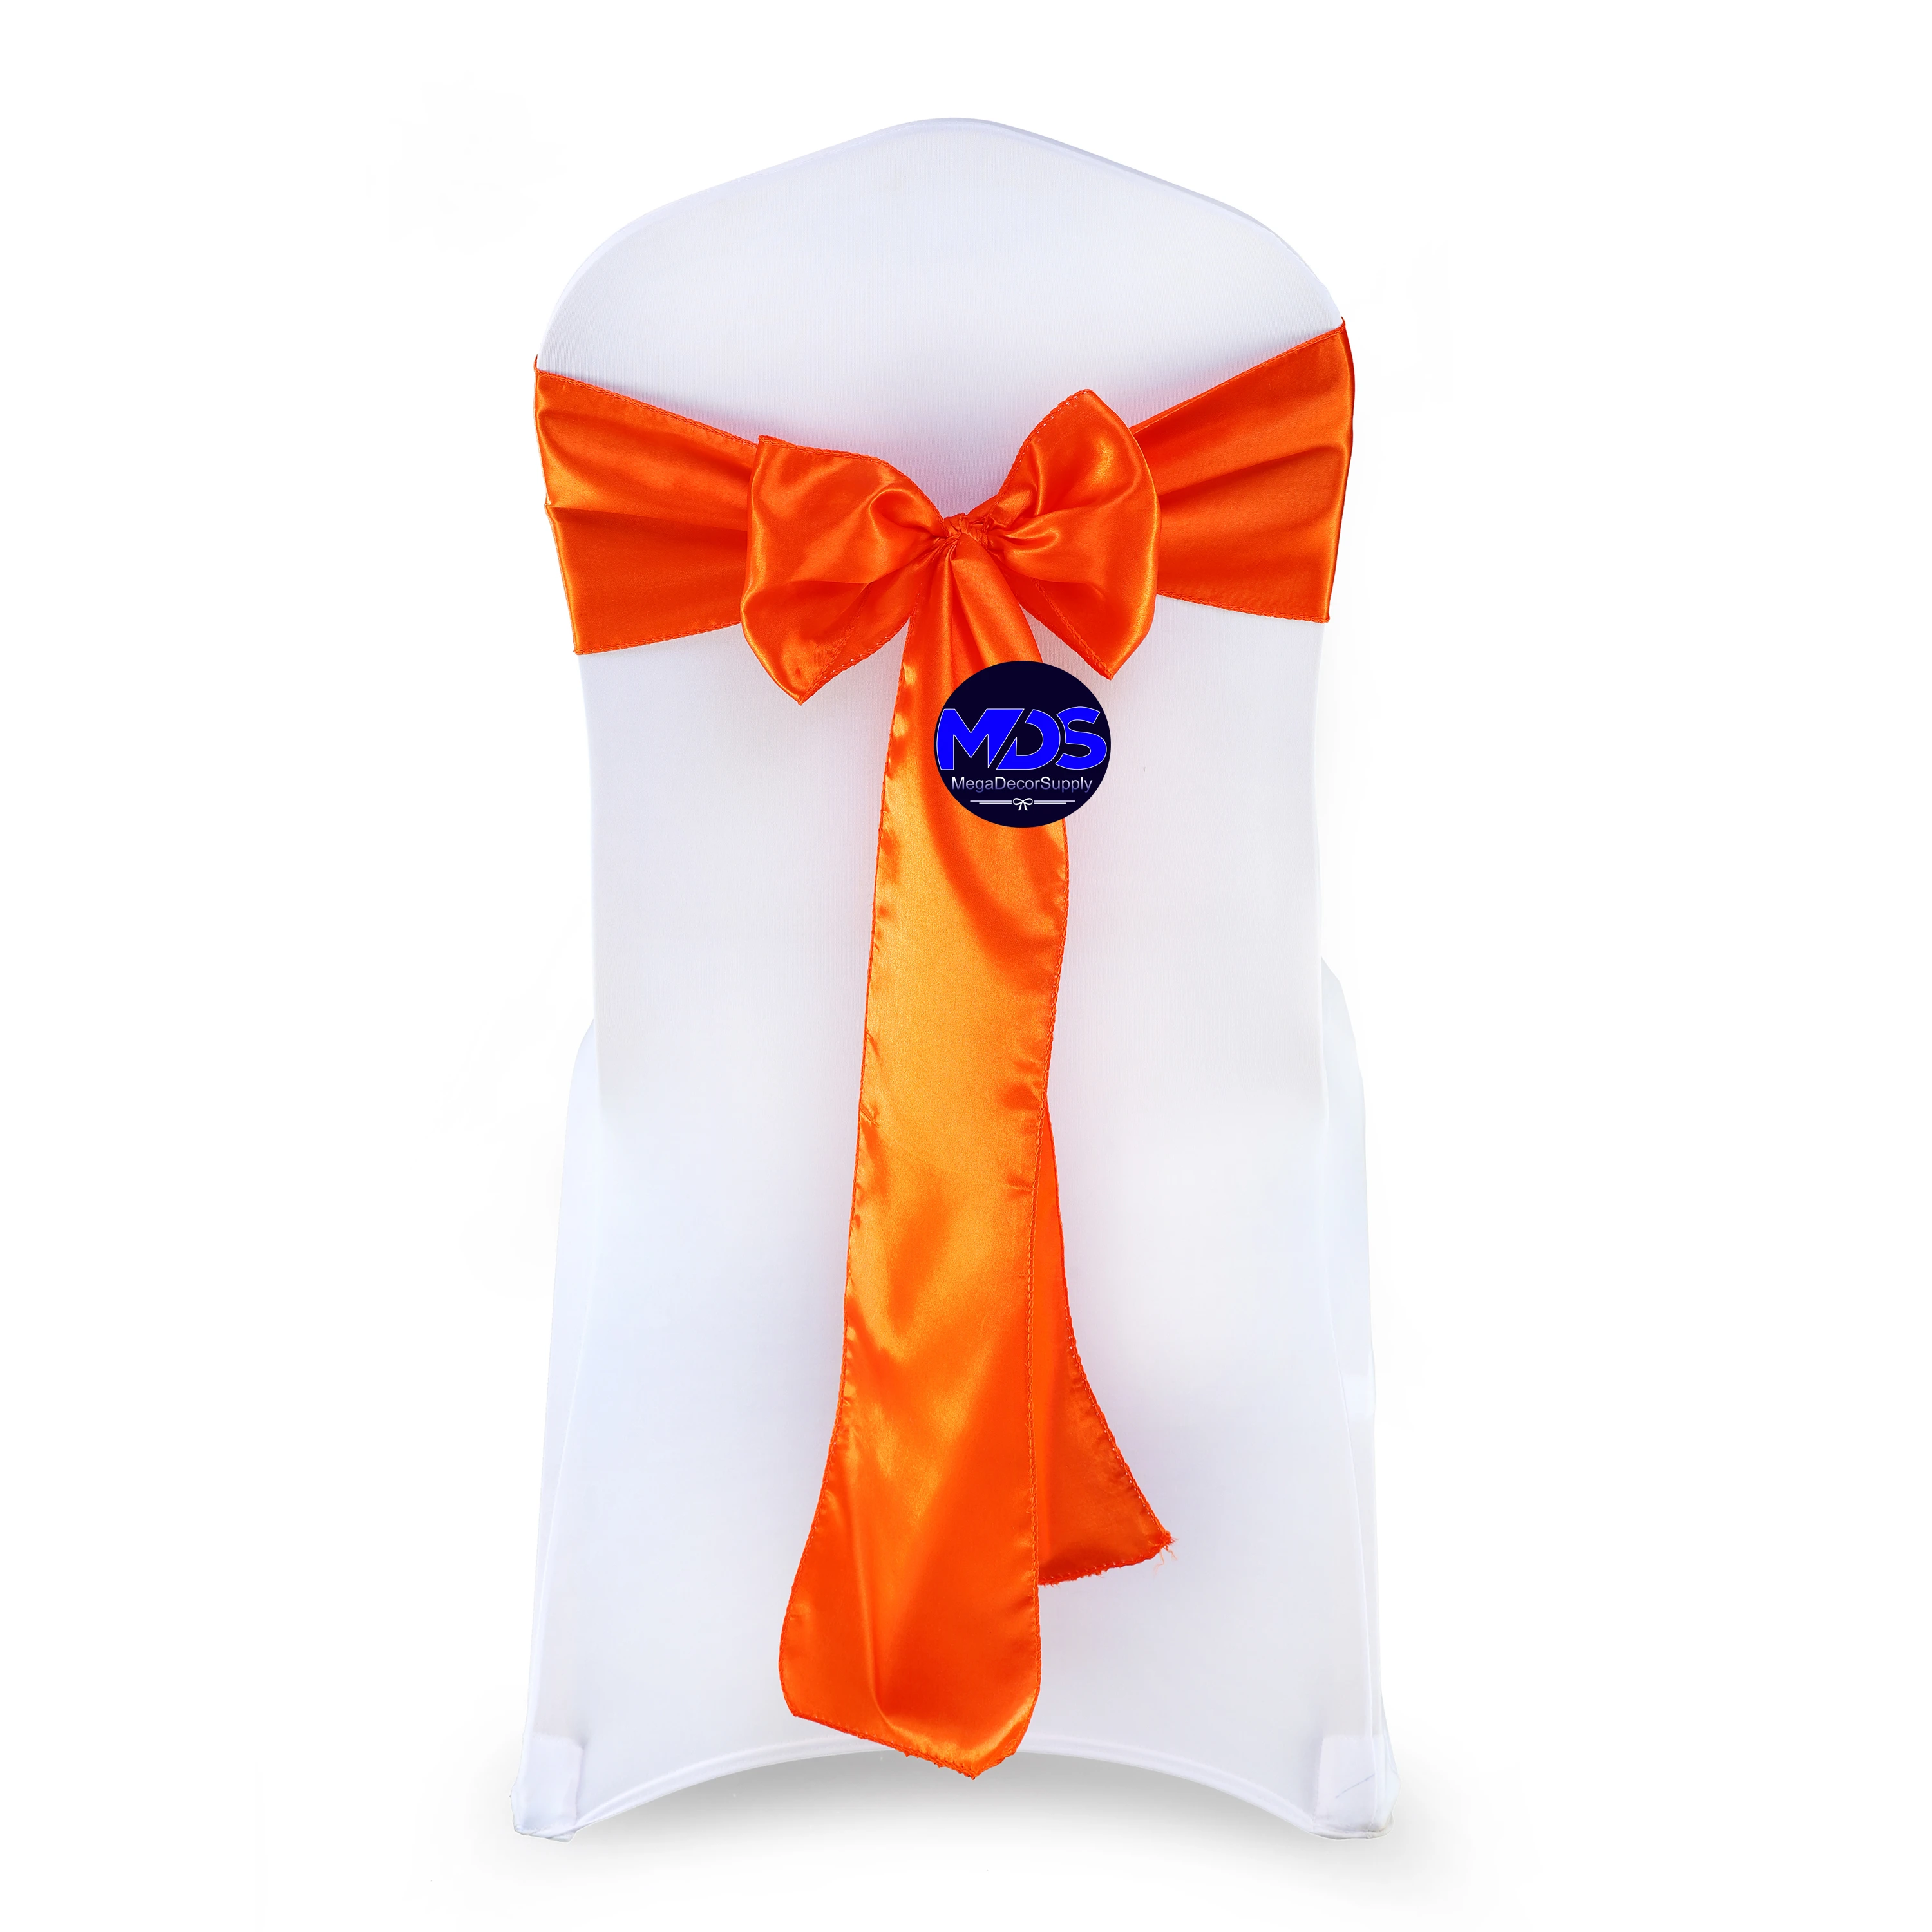 MDS Satin Chair Sashes Bow sash for Wedding and Events Supplies Party Decoration Chair Cover sash -Orange